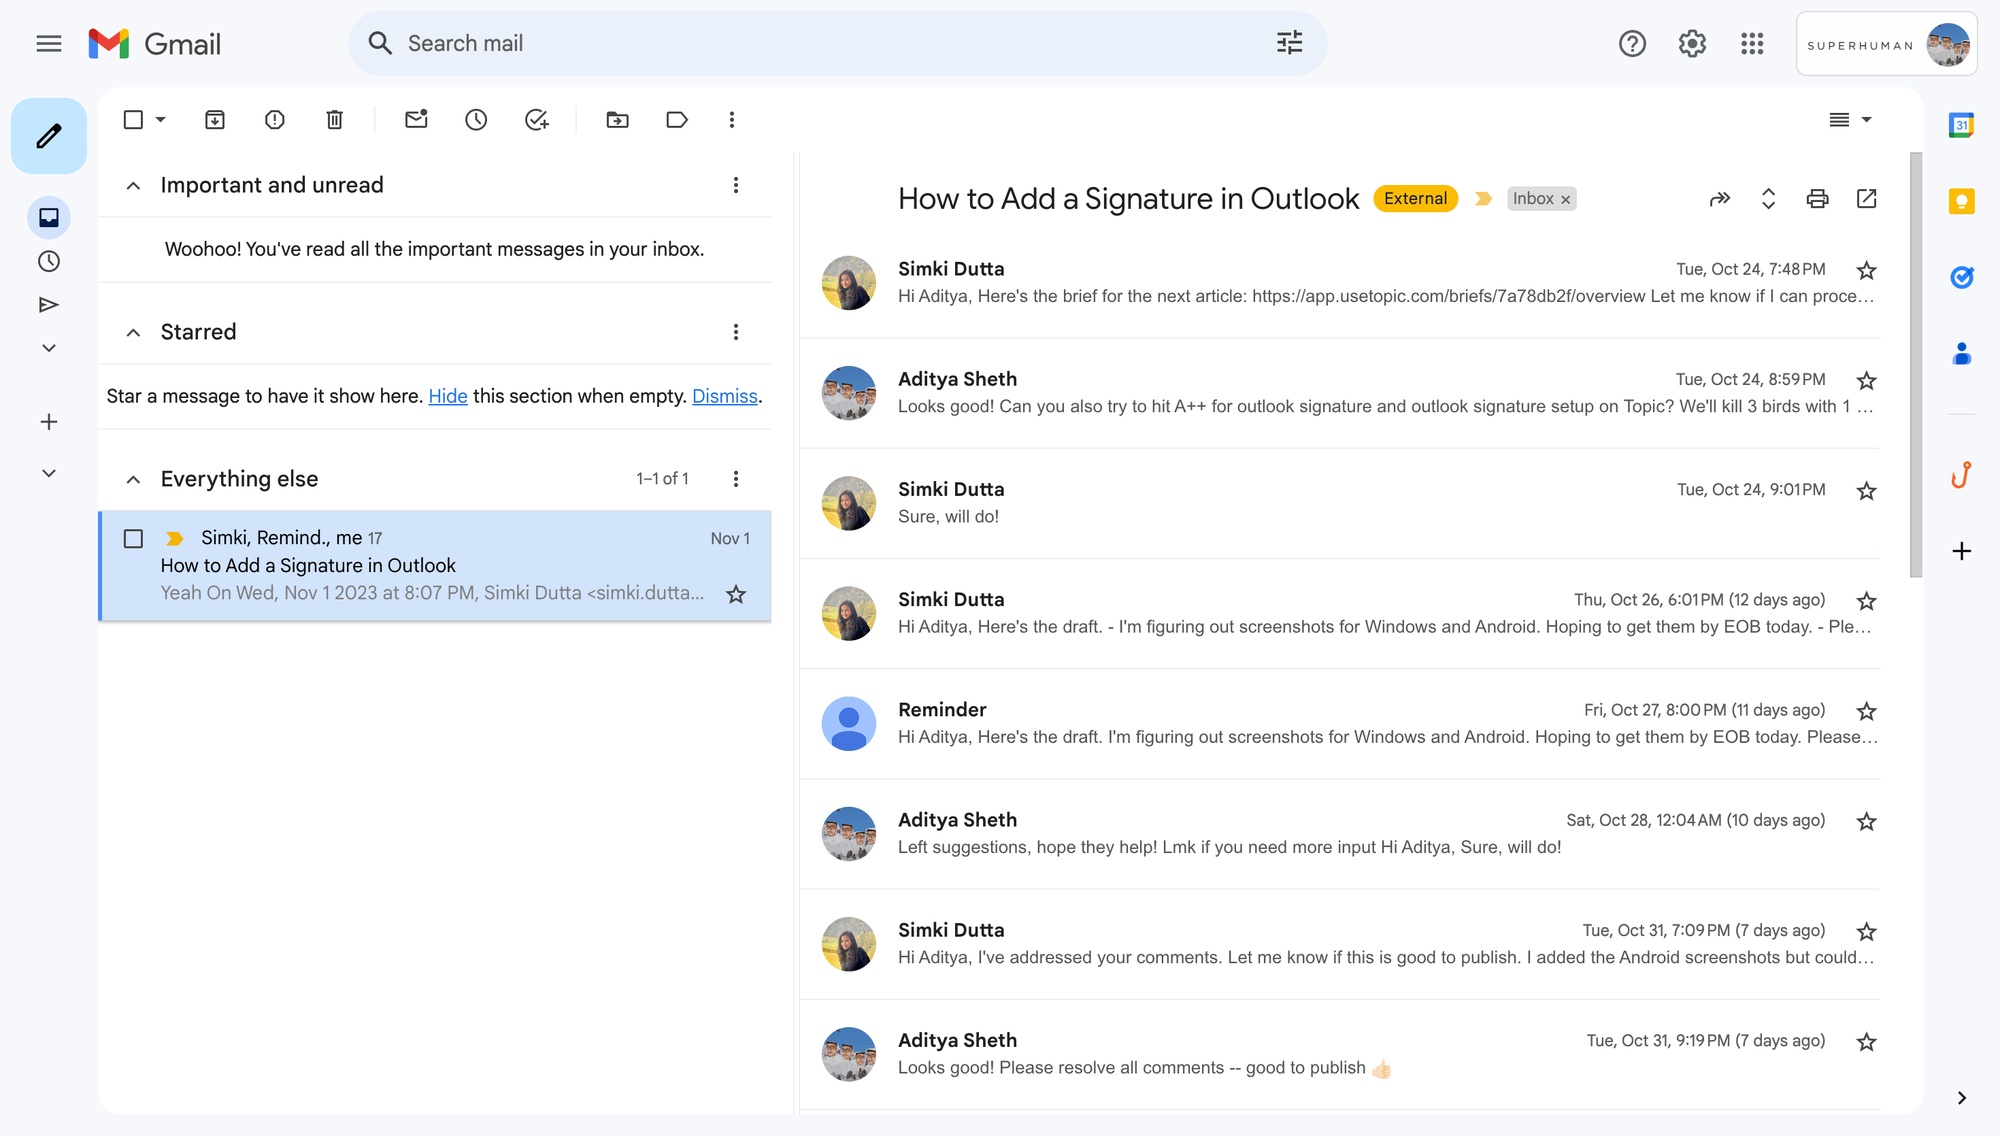 Email Thread in Gmail